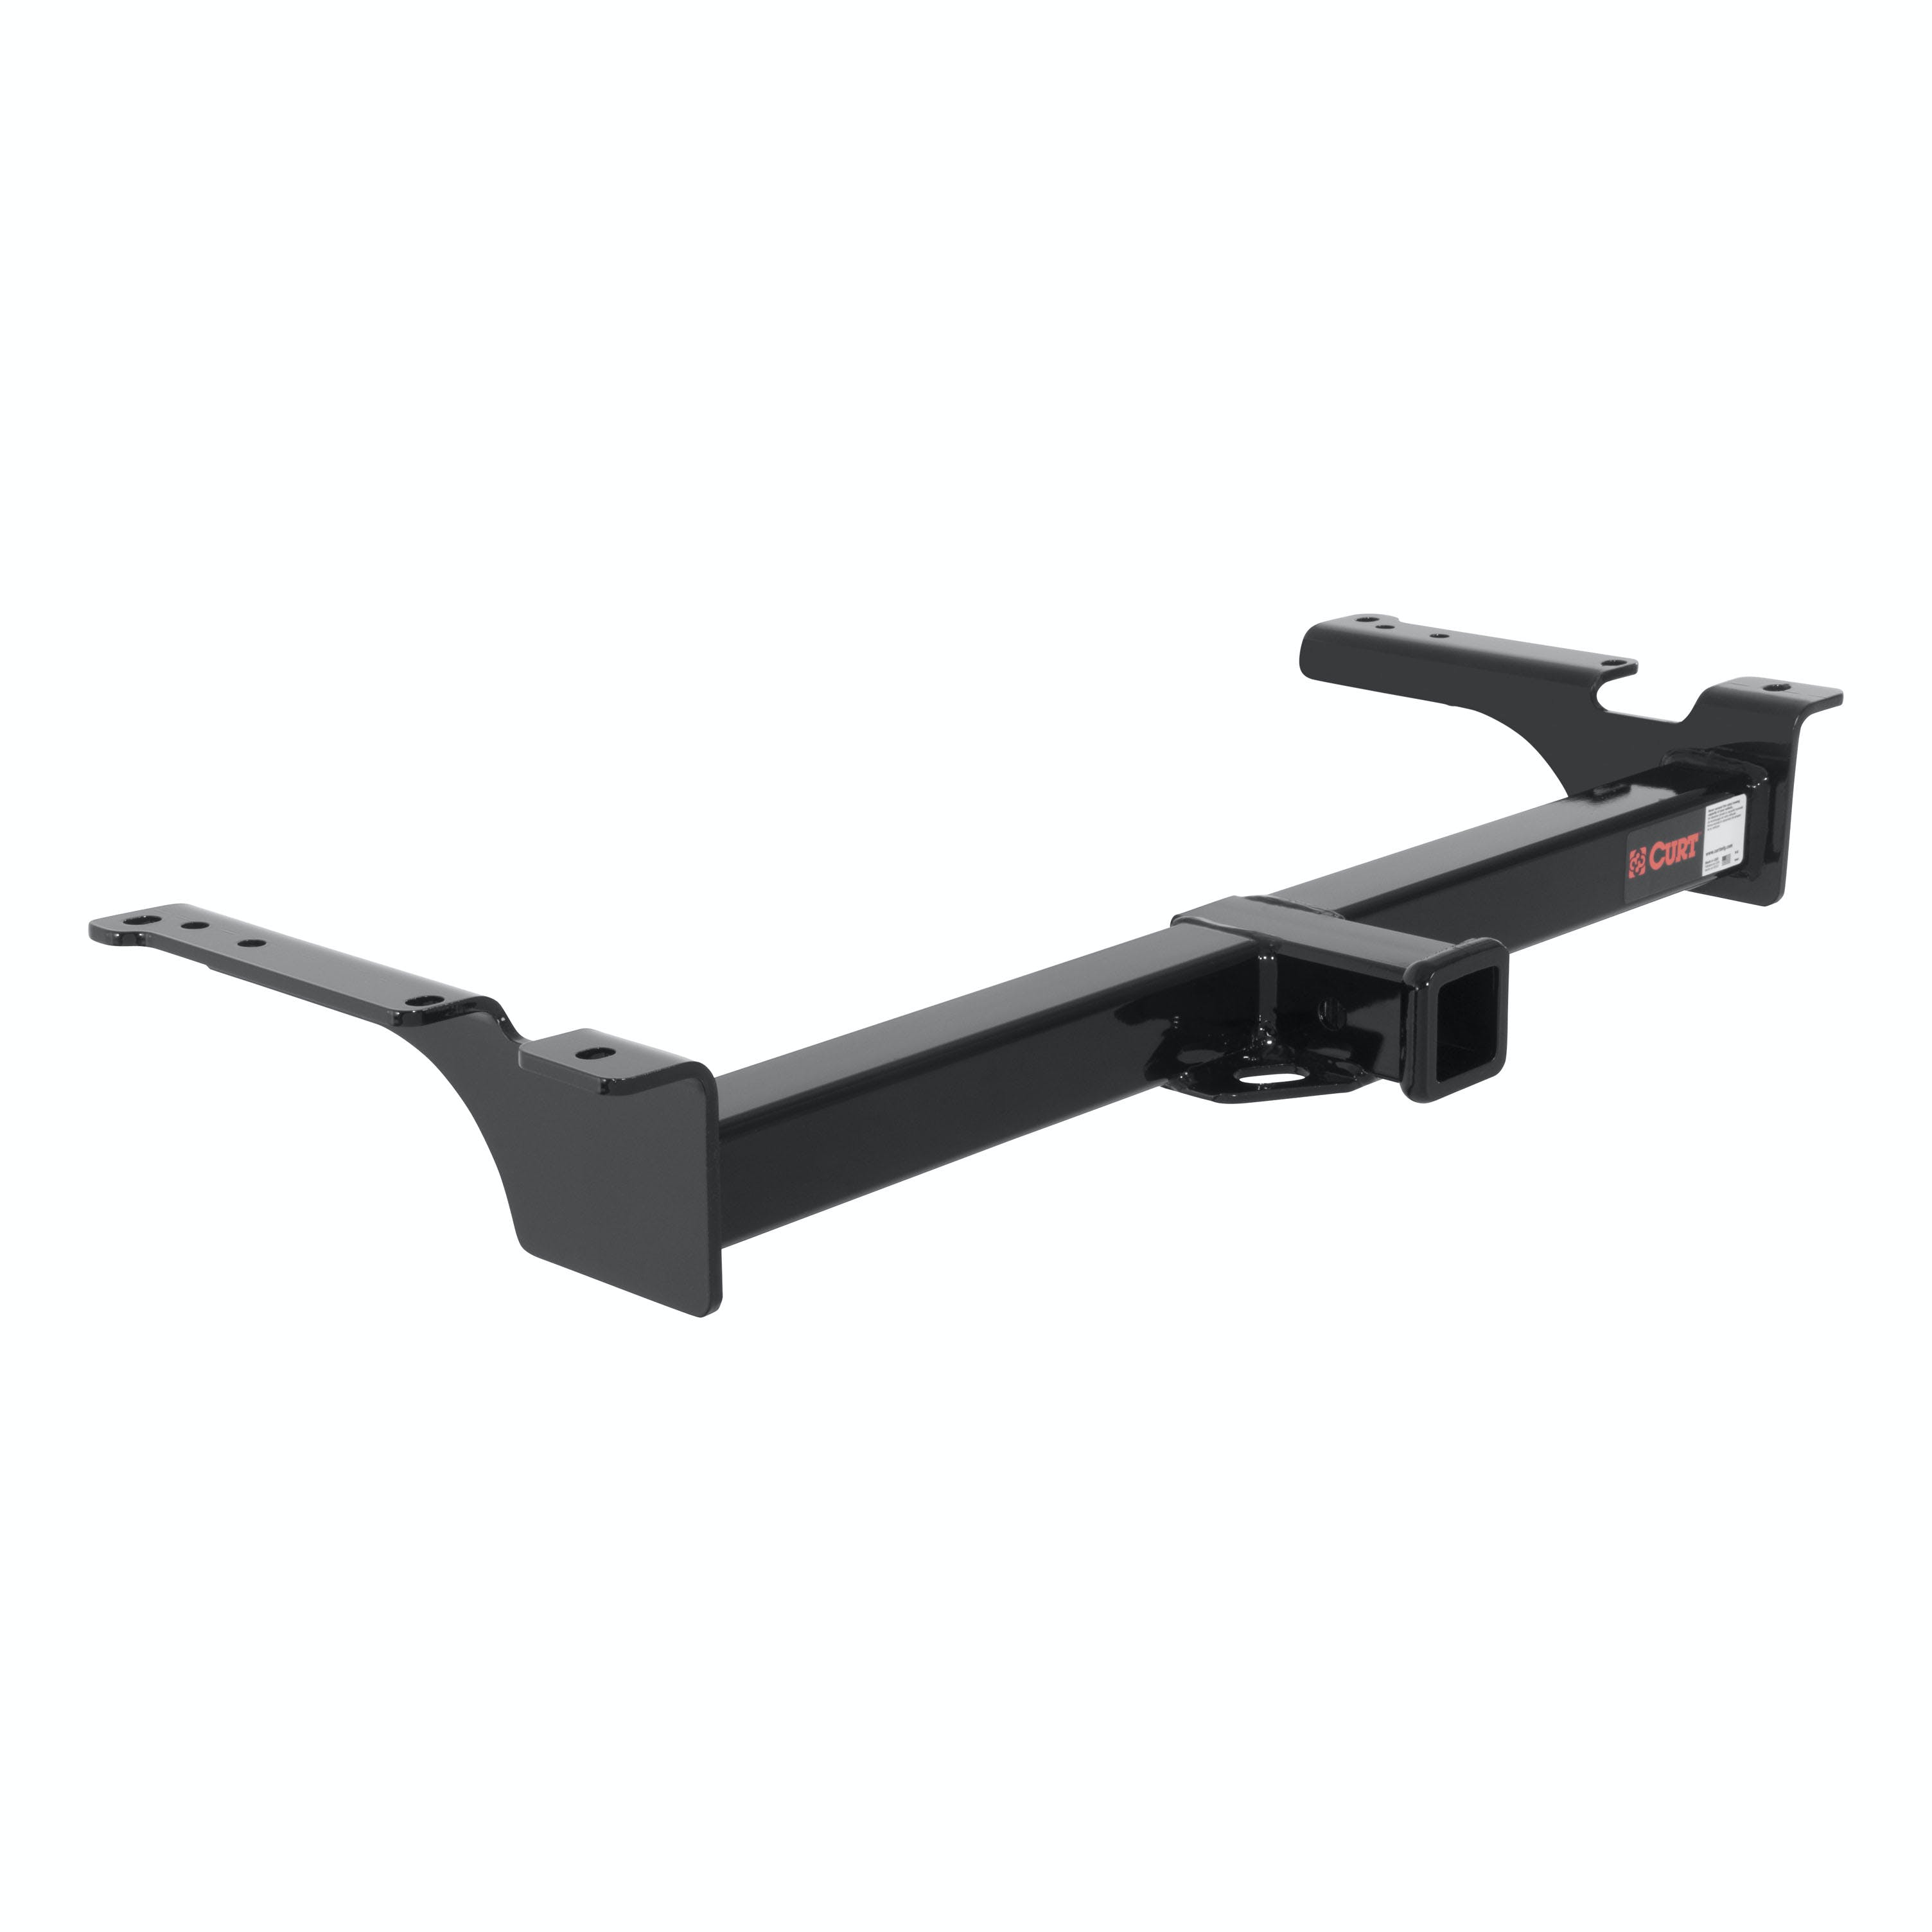 CURT 14053 Class 4 Hitch, 2, Select Ford E-Series (Exhaust May Require Modification)